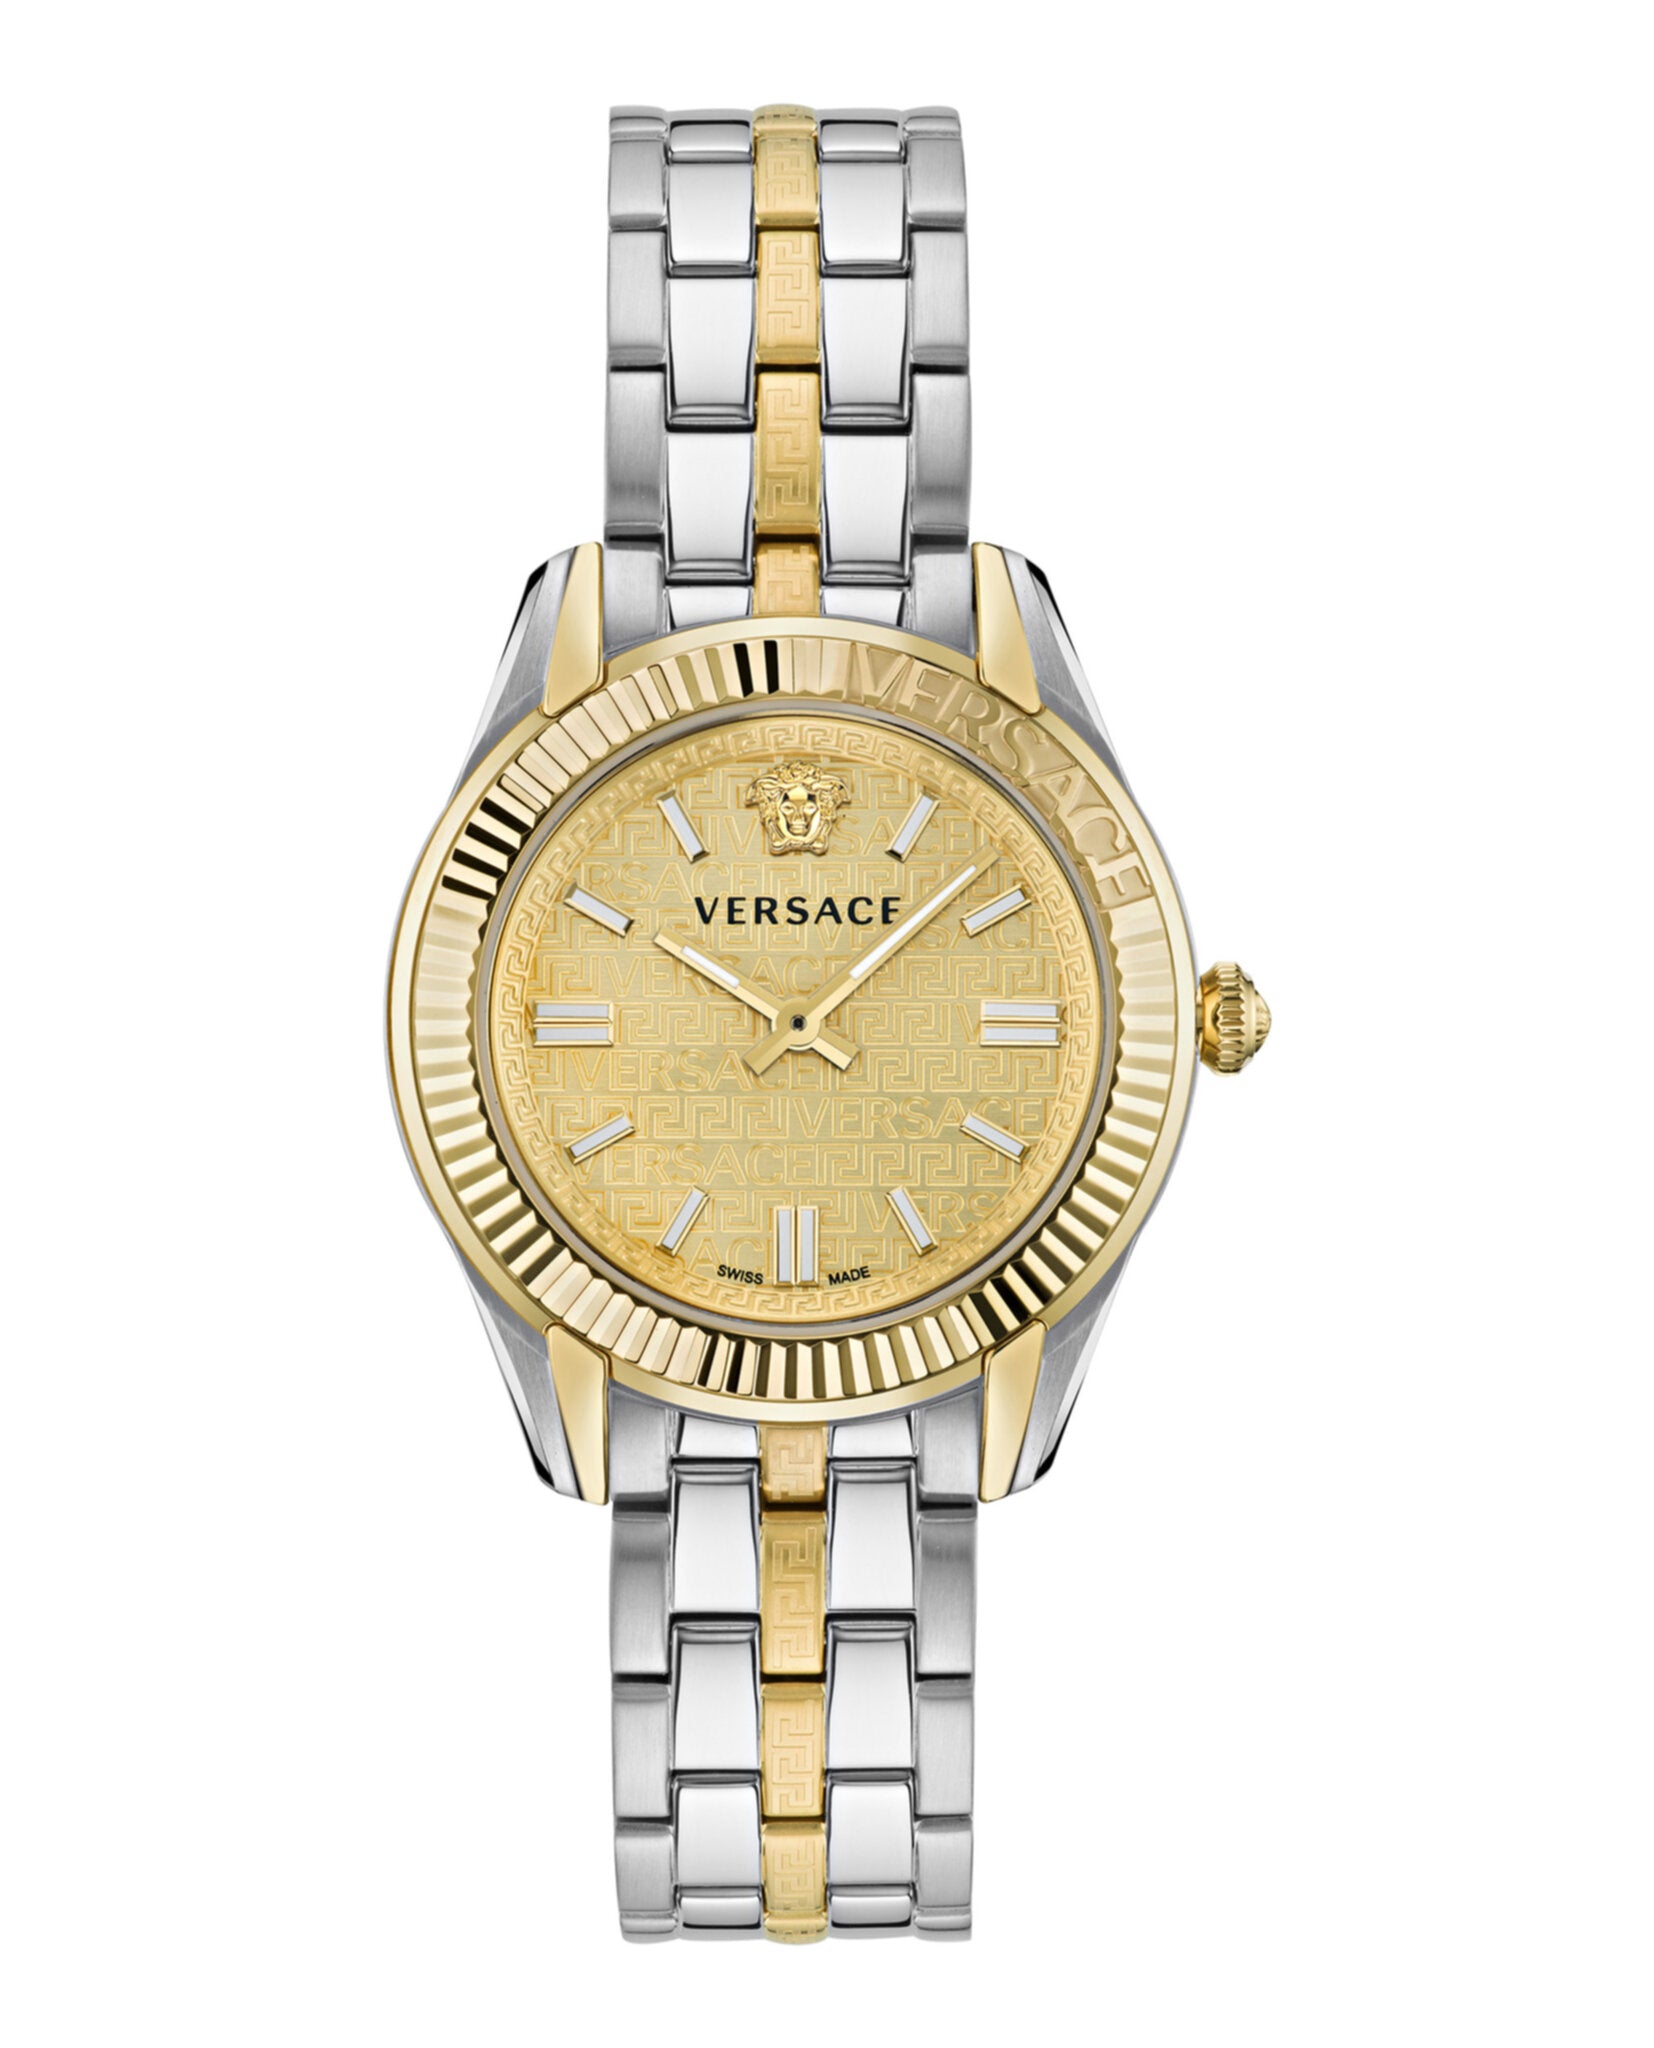 Versace Womens Greca Time | MadaLuxe – Madaluxe Watches Time Time